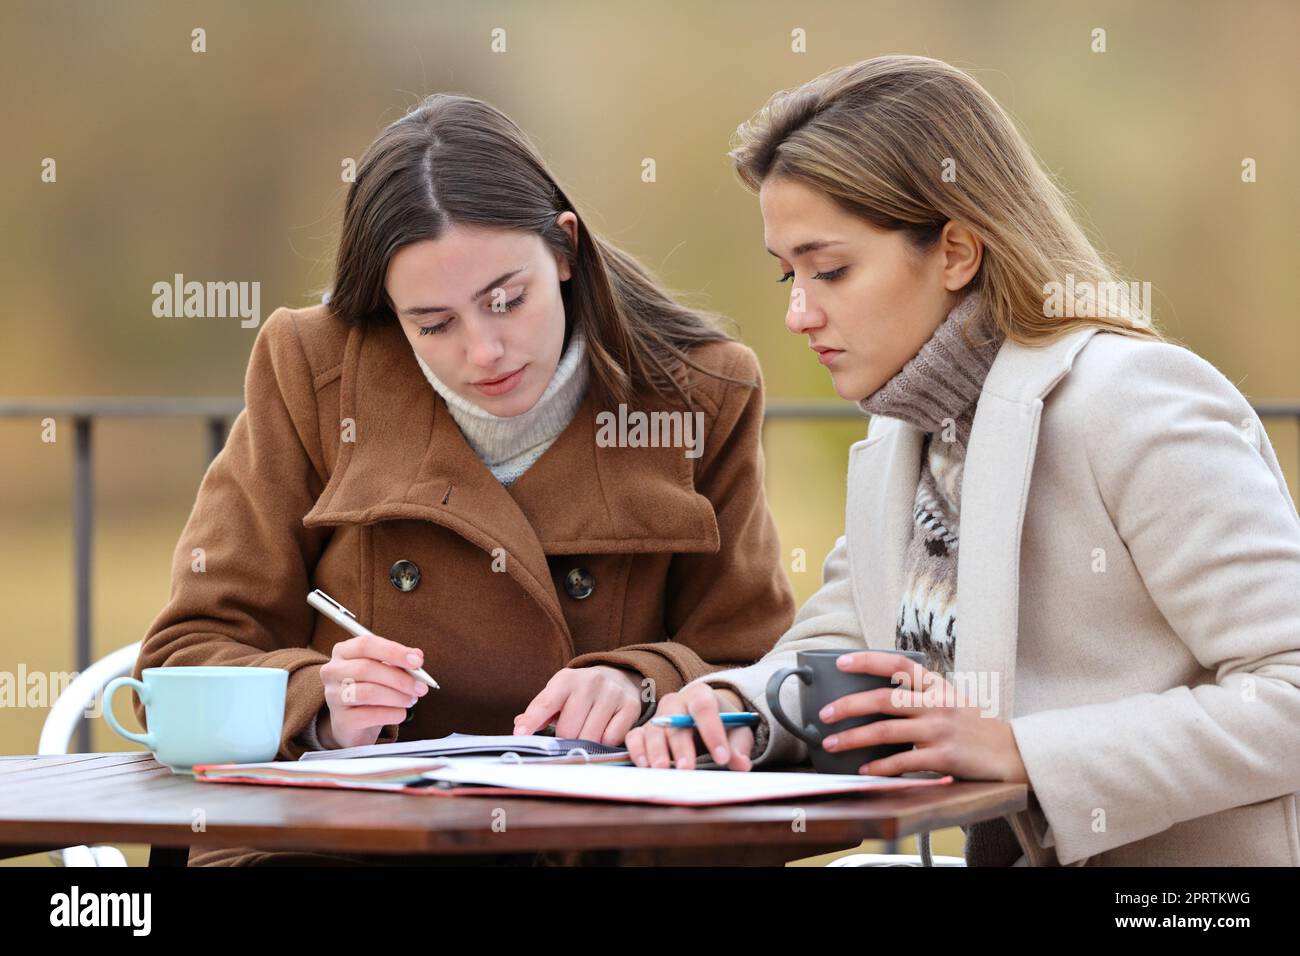 Two students checking notes in a terrace Stock Photo